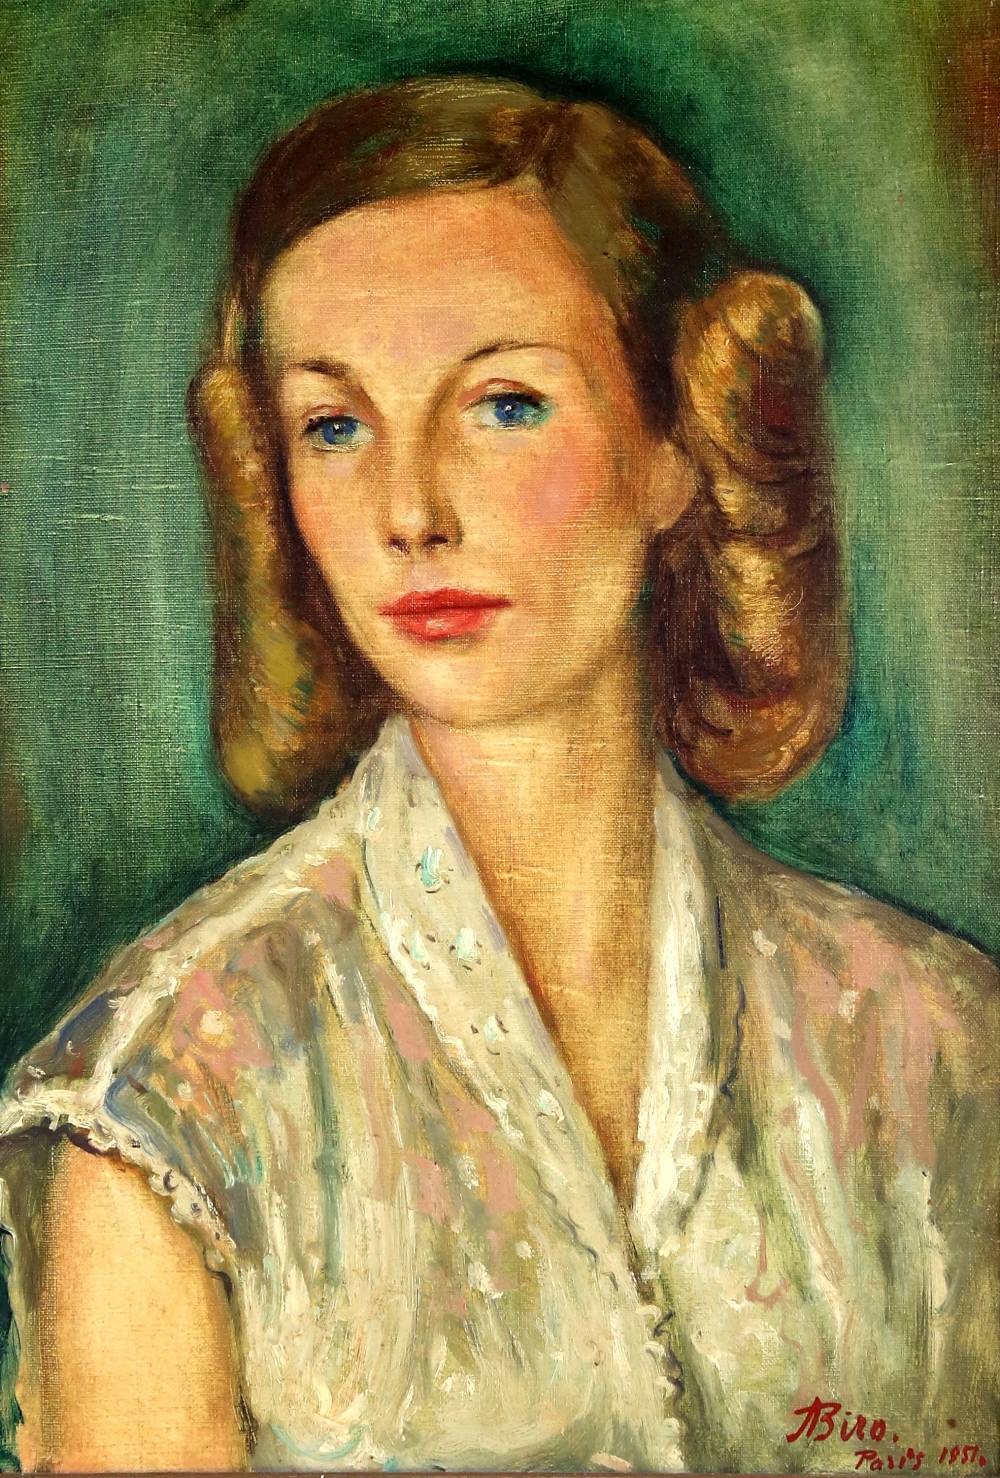 Biro, Paris Portrait of a lady, oil on canvas, 53cm x 47cm signed and dated 1951 and another oil